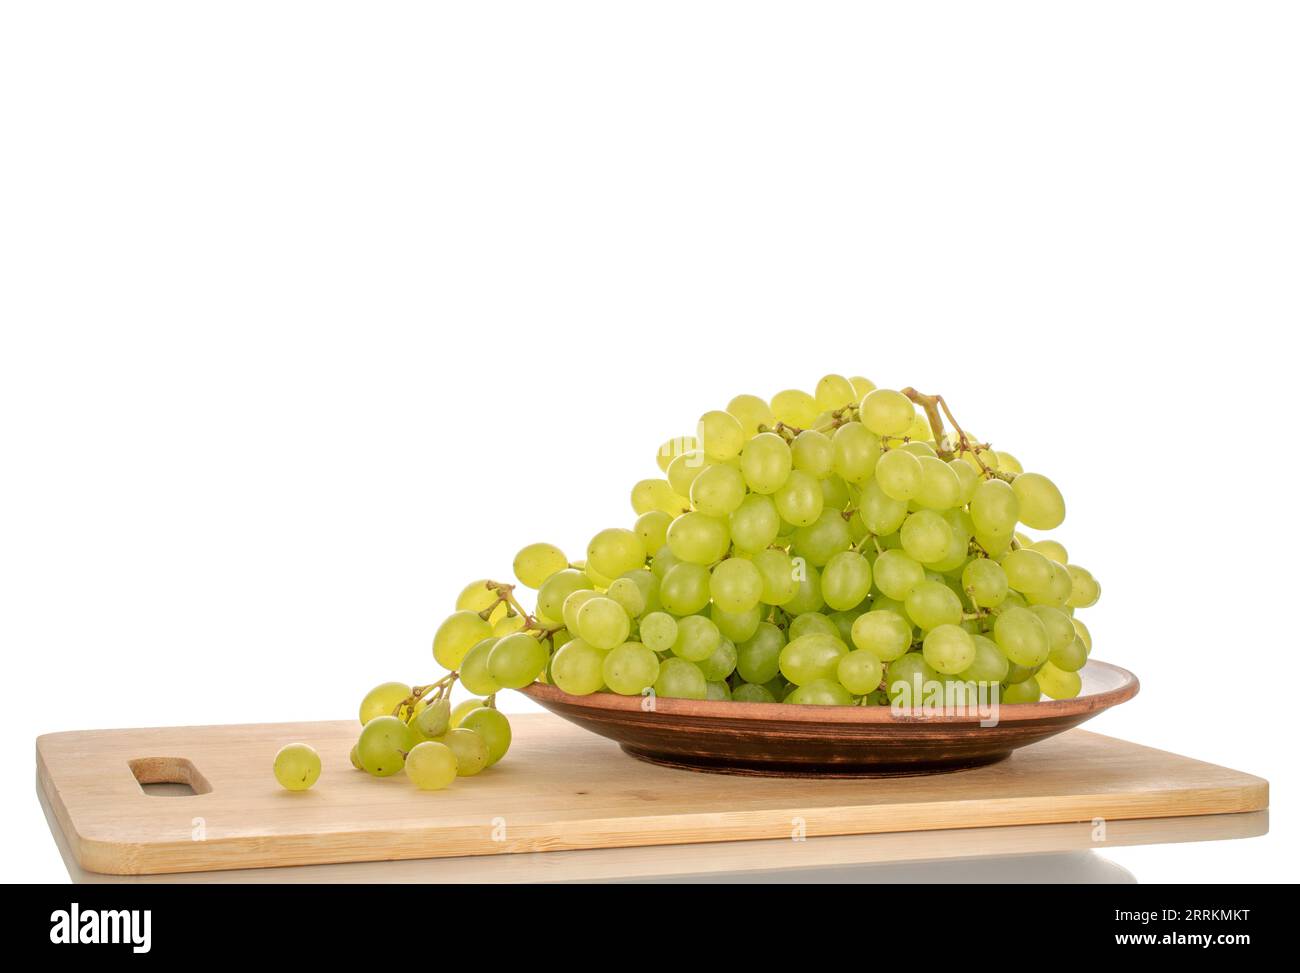 https://c8.alamy.com/comp/2RRKMKT/sweet-organic-grapes-with-clay-plate-on-bamboo-kitchen-board-macro-isolated-on-white-background-2RRKMKT.jpg